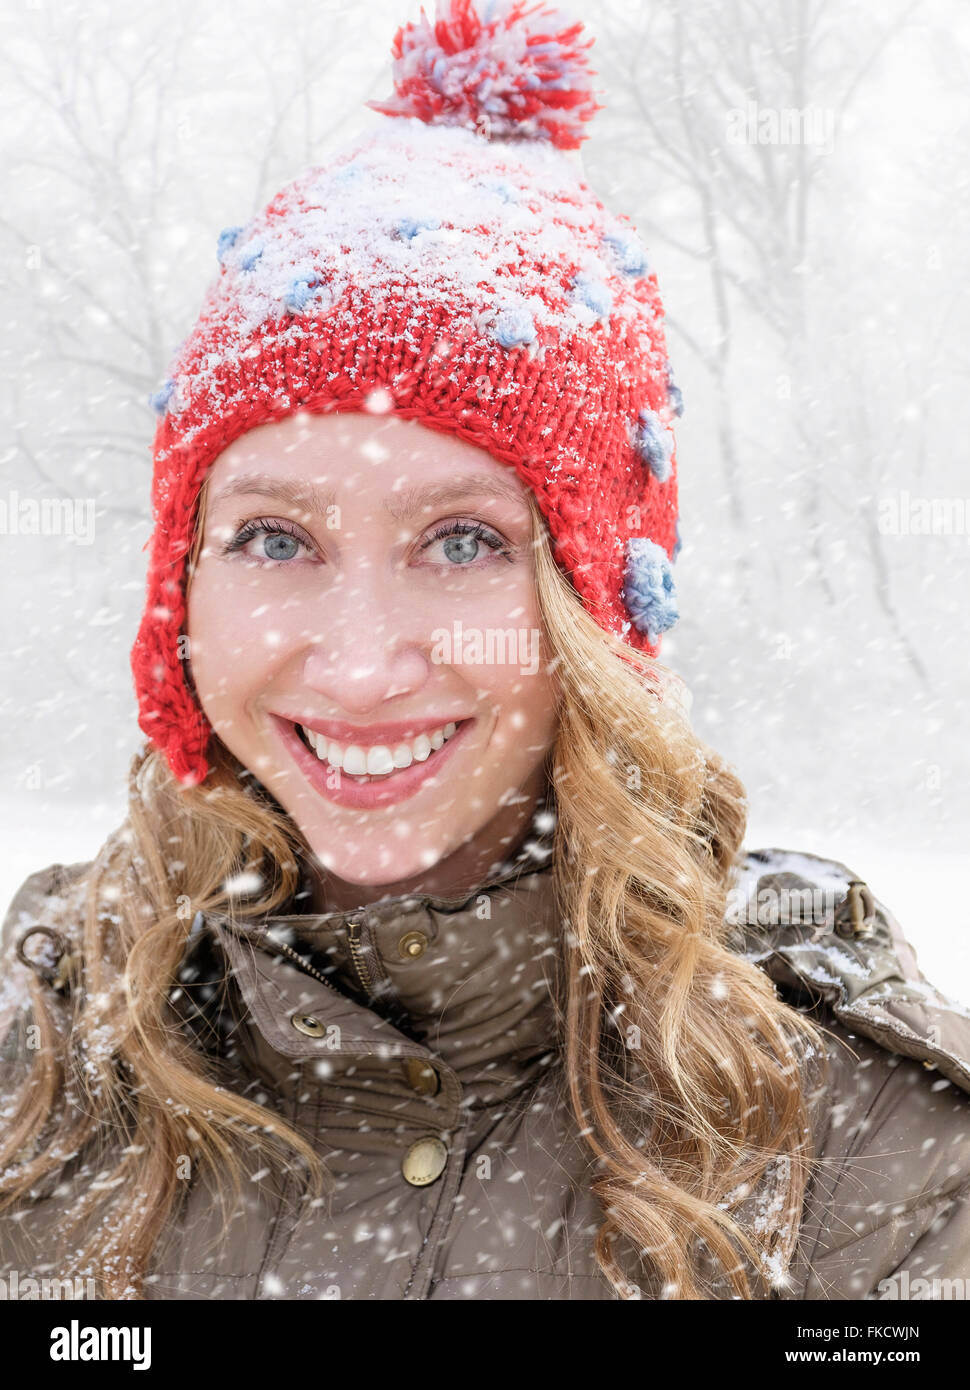 Portrait of woman in red knit hat Stock Photo